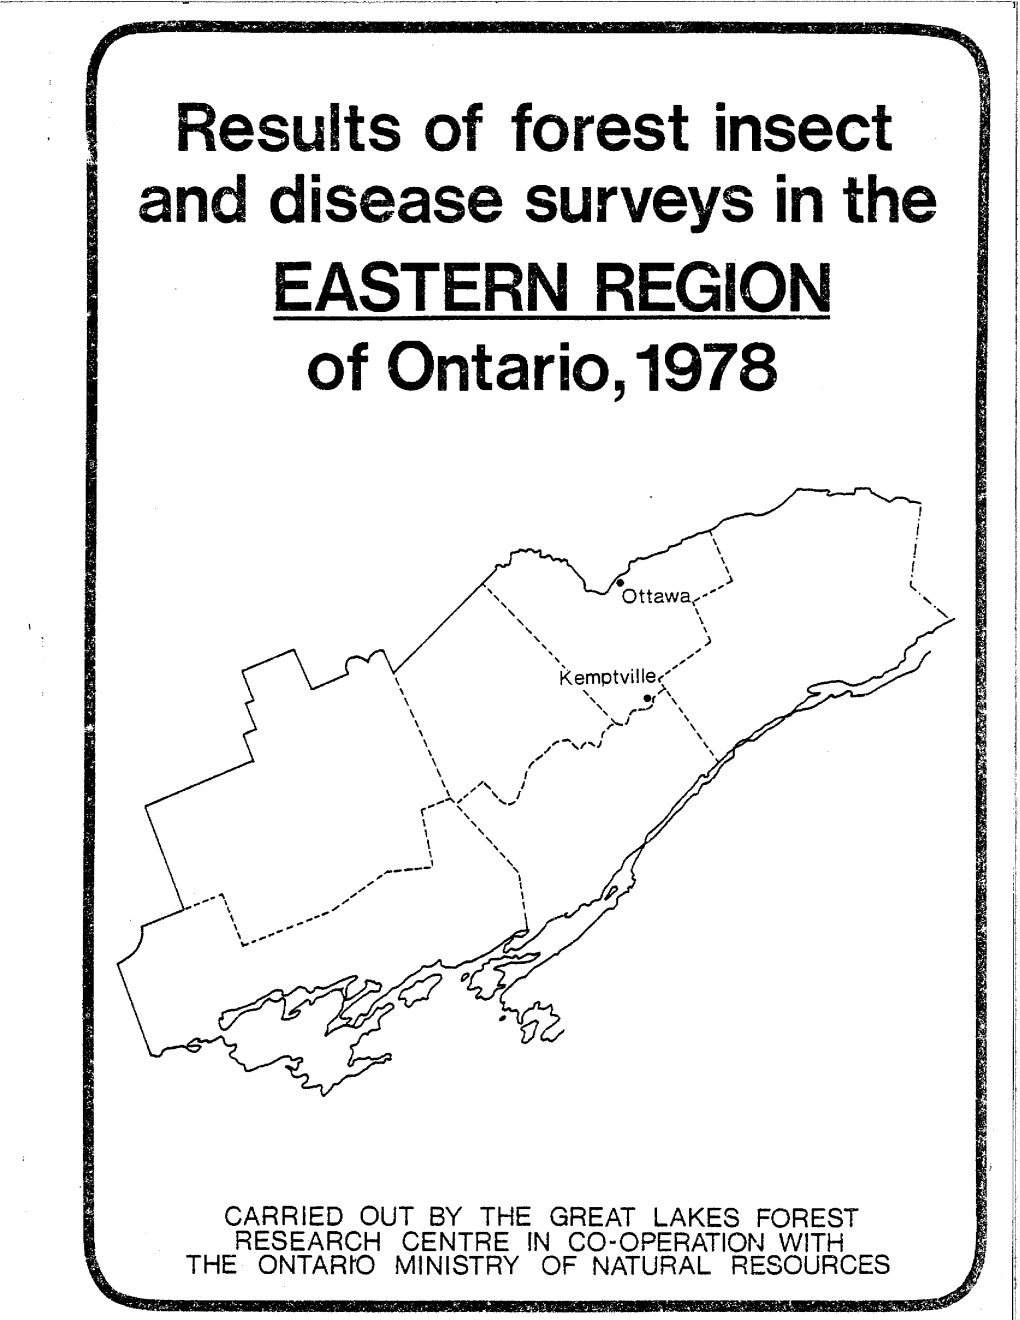 Results of Forest Insect and Disease Surveys in the EASTERN REGION of Ontario,1978